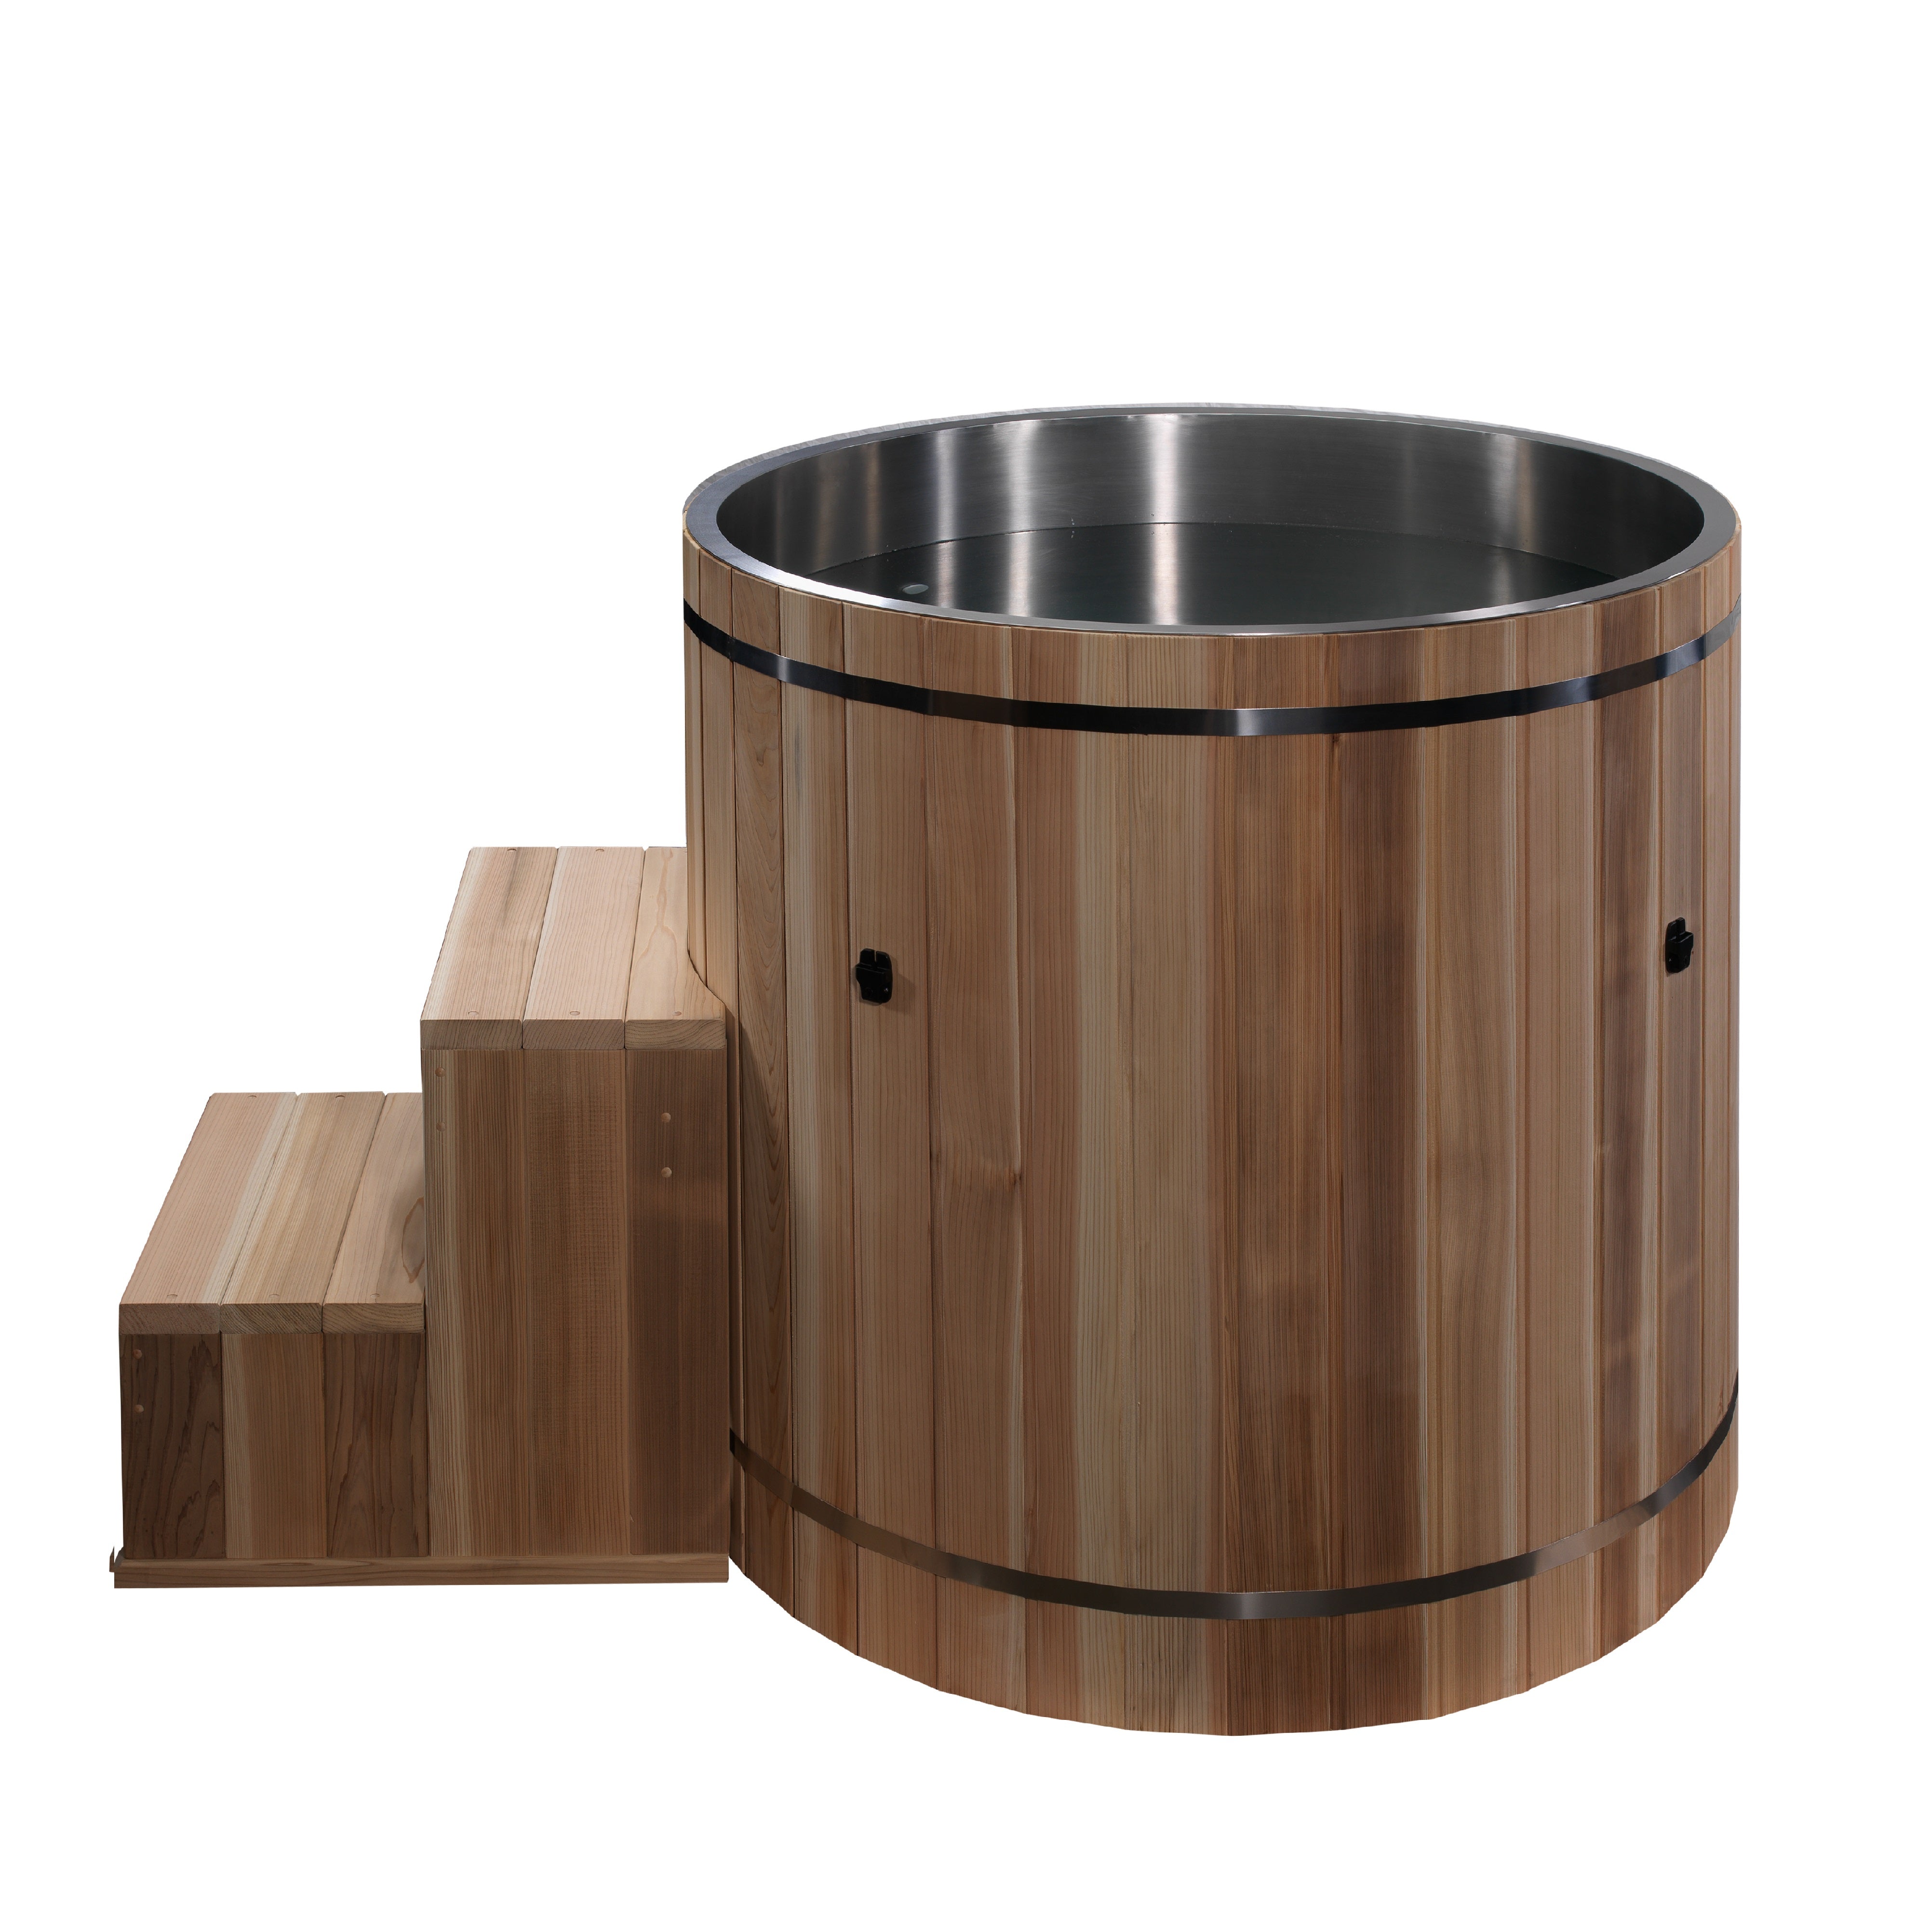 Barrel Cold Plunge/ Ice Bath Stainless Steel with Pacific Cedar Exterior By DCT